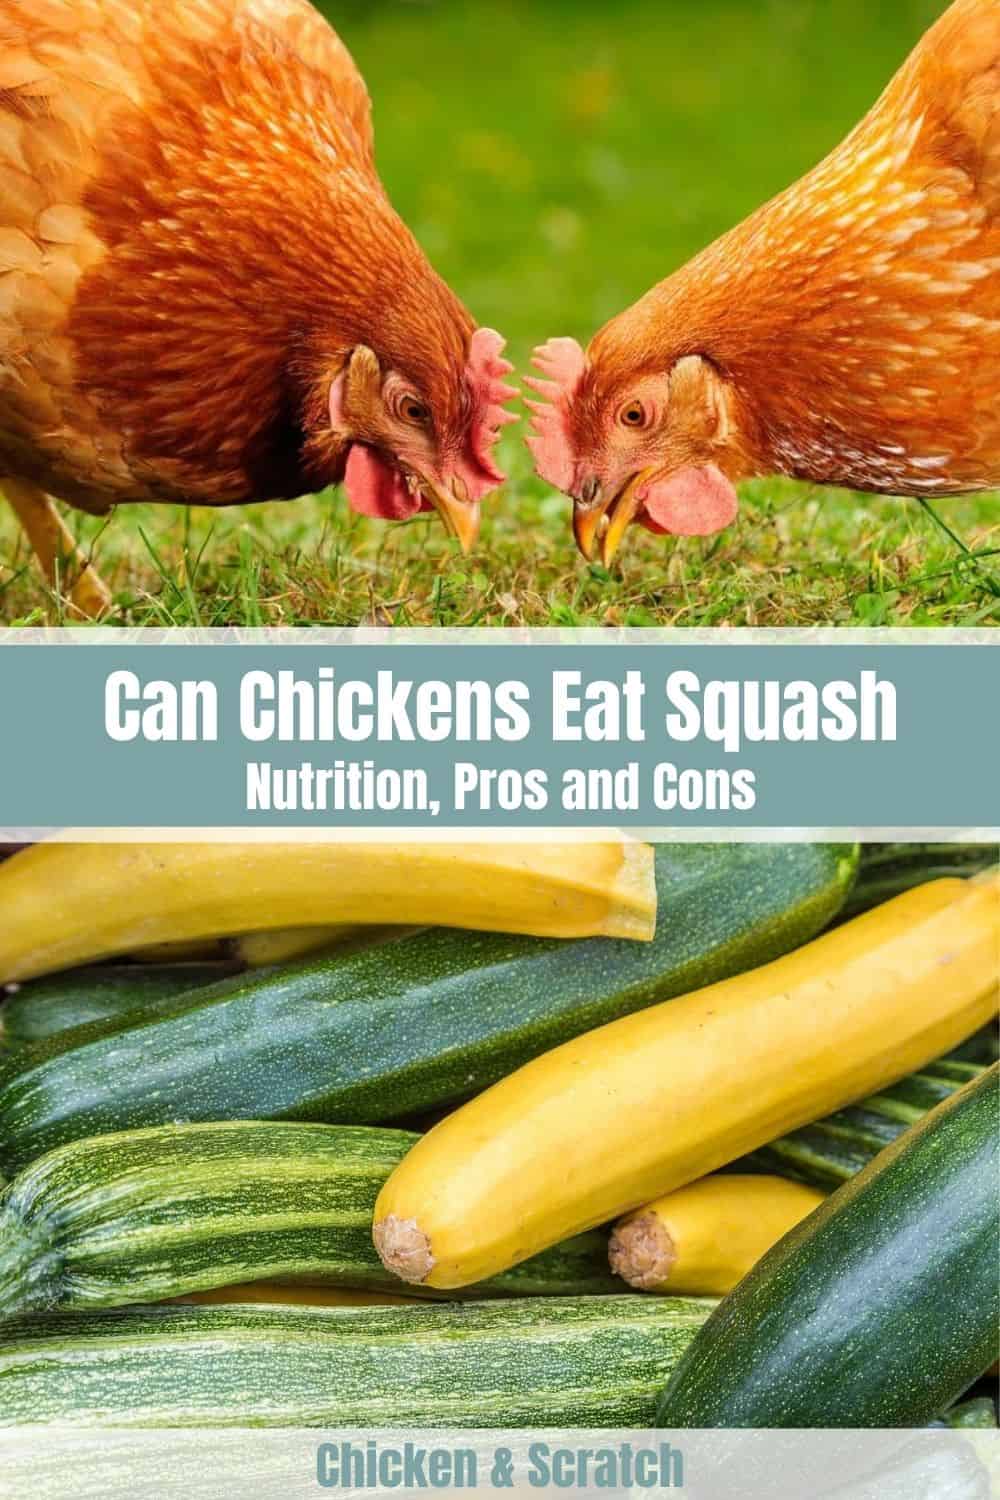 can chickens eat yellow squash